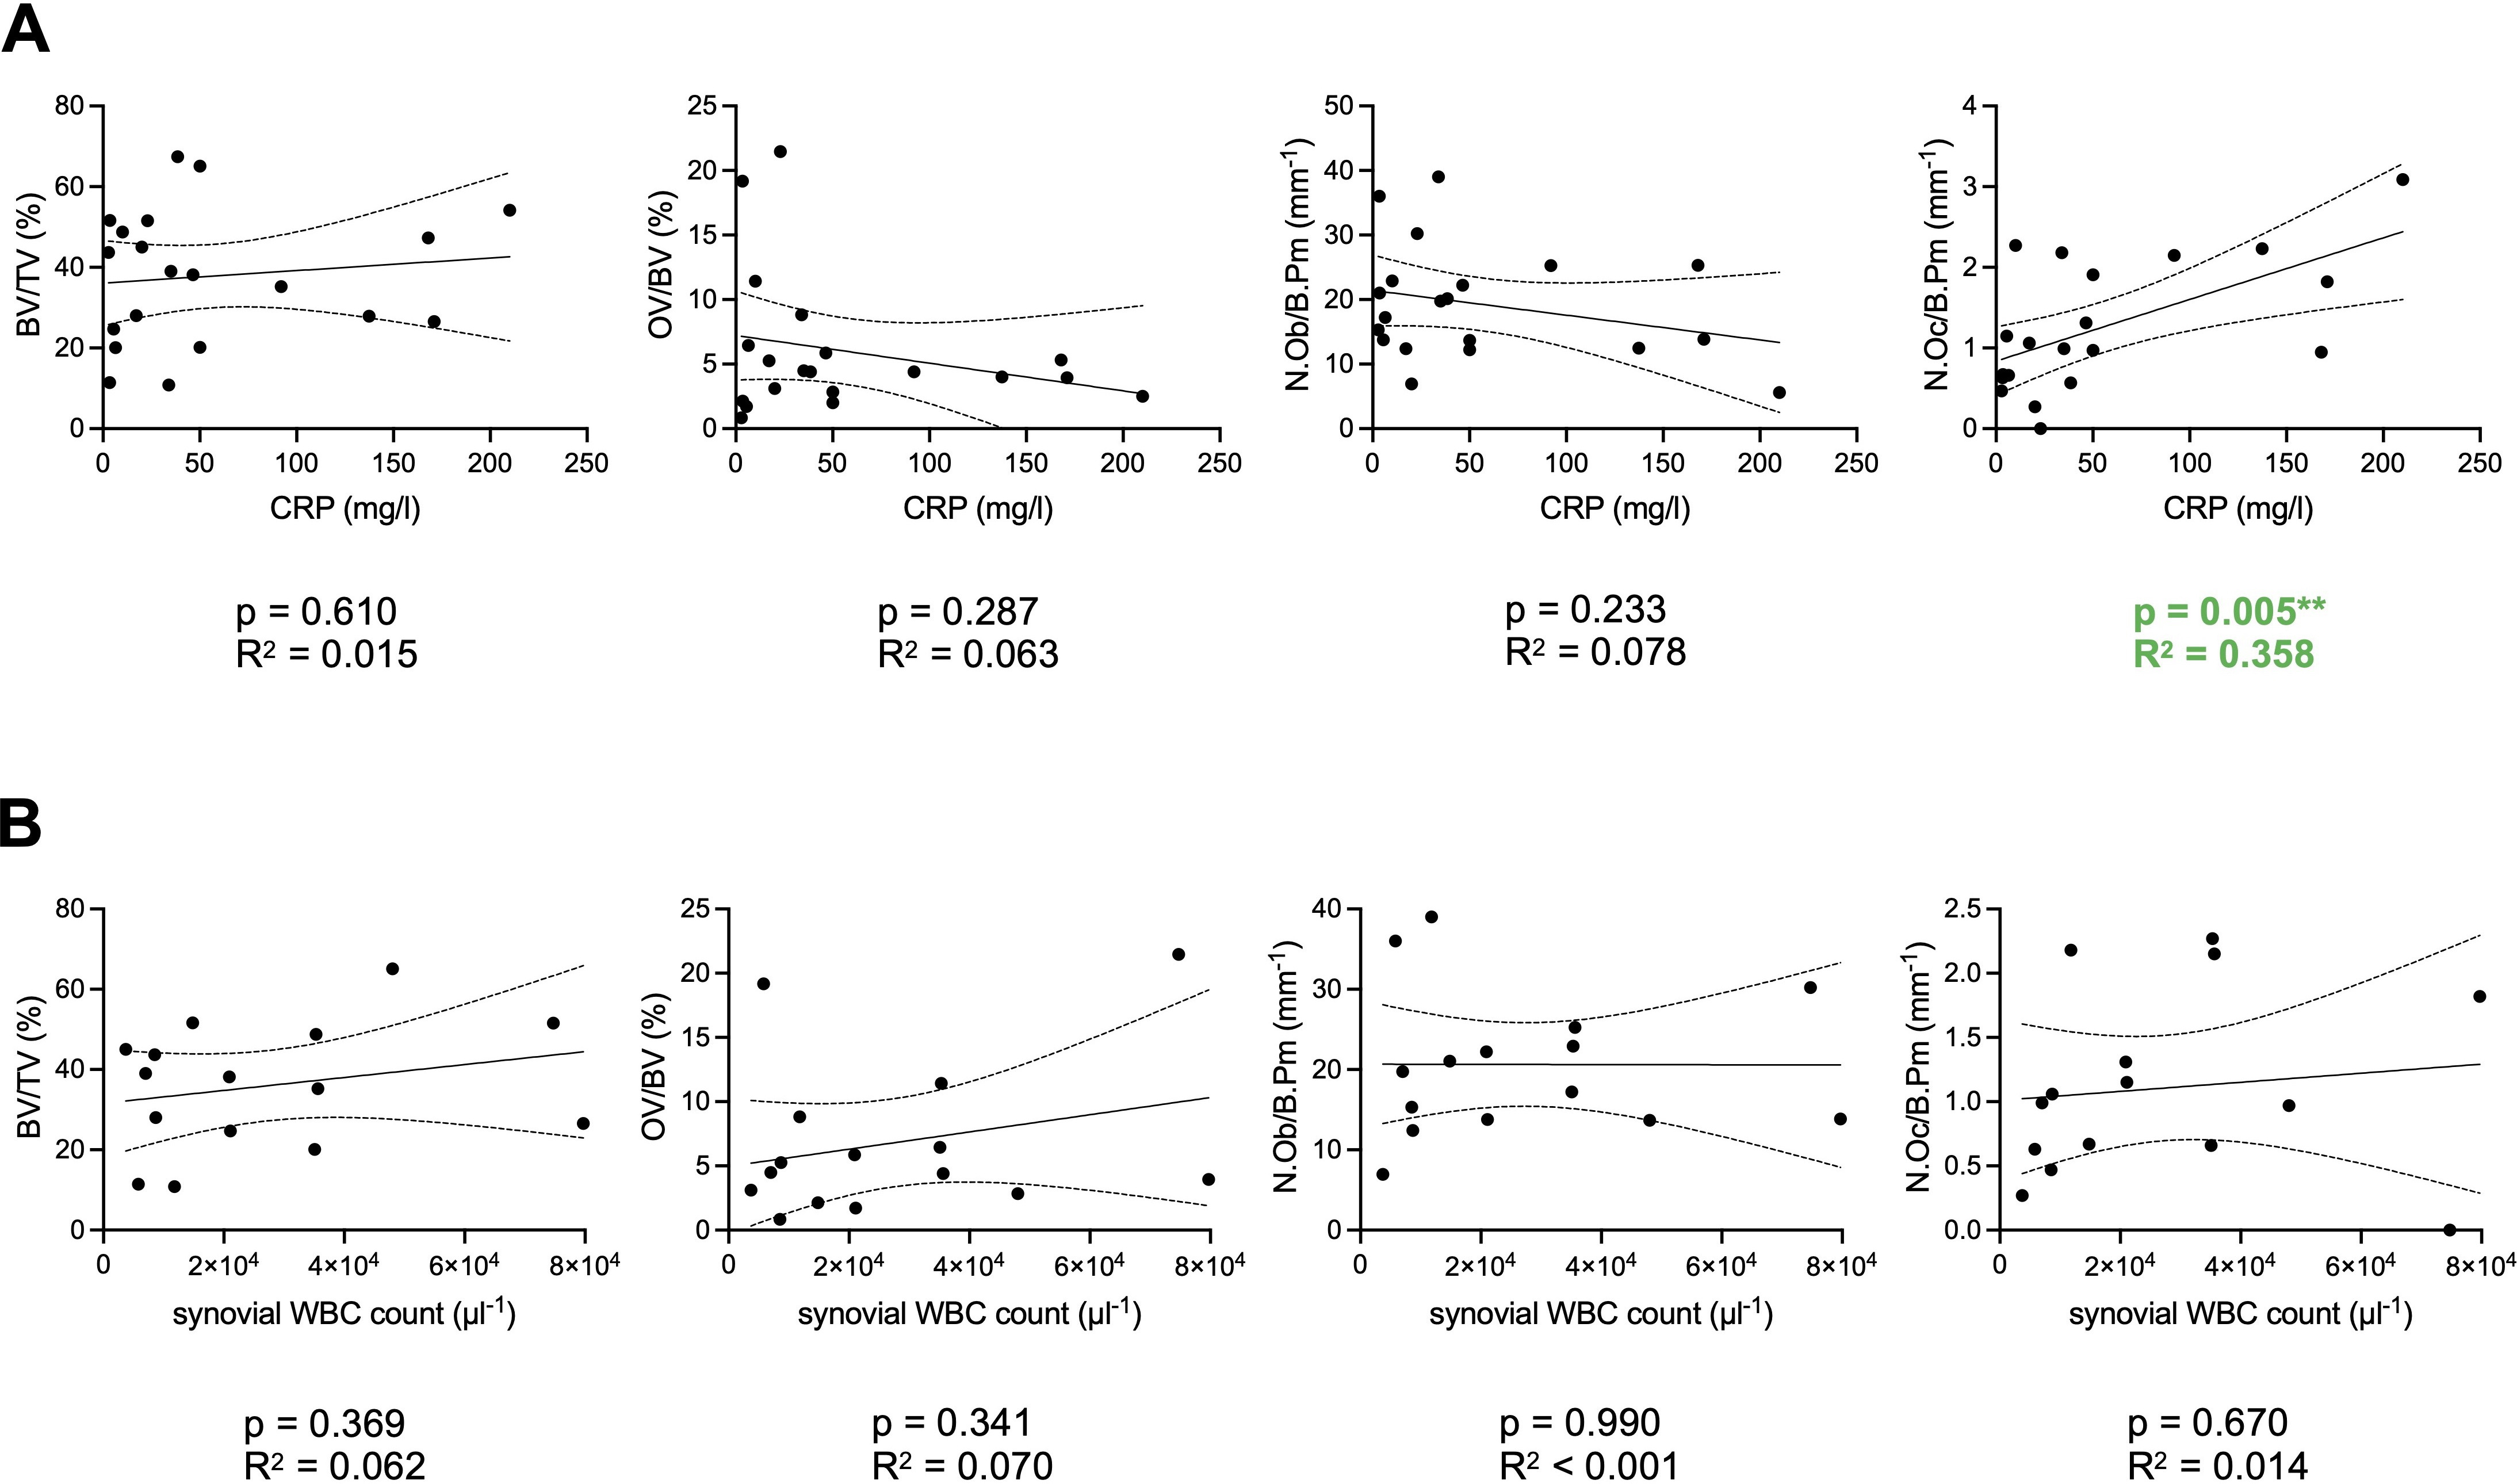 Fig. 4 
            Associations between laboratory inflammation markers and histological bone parameters in the periprosthetic joint infection group. a) Linear regression analysis between serum CRP and bone parameters (bone volume per tissue volume (BV/TV), osteoid volume per bone volume (OV/BV), number of osteoblasts per bone perimeter (N.Ob/B.Pm), number of osteoclasts per bone perimeter (N.Oc/B.Pm)) (n = 20). b) Linear regression analysis between synovial white blood cell (WBC) count and the same bone parameters (n = 15). Exact p-values (unless < 0.001) and R2 values are depicted. **p < 0.05.
          